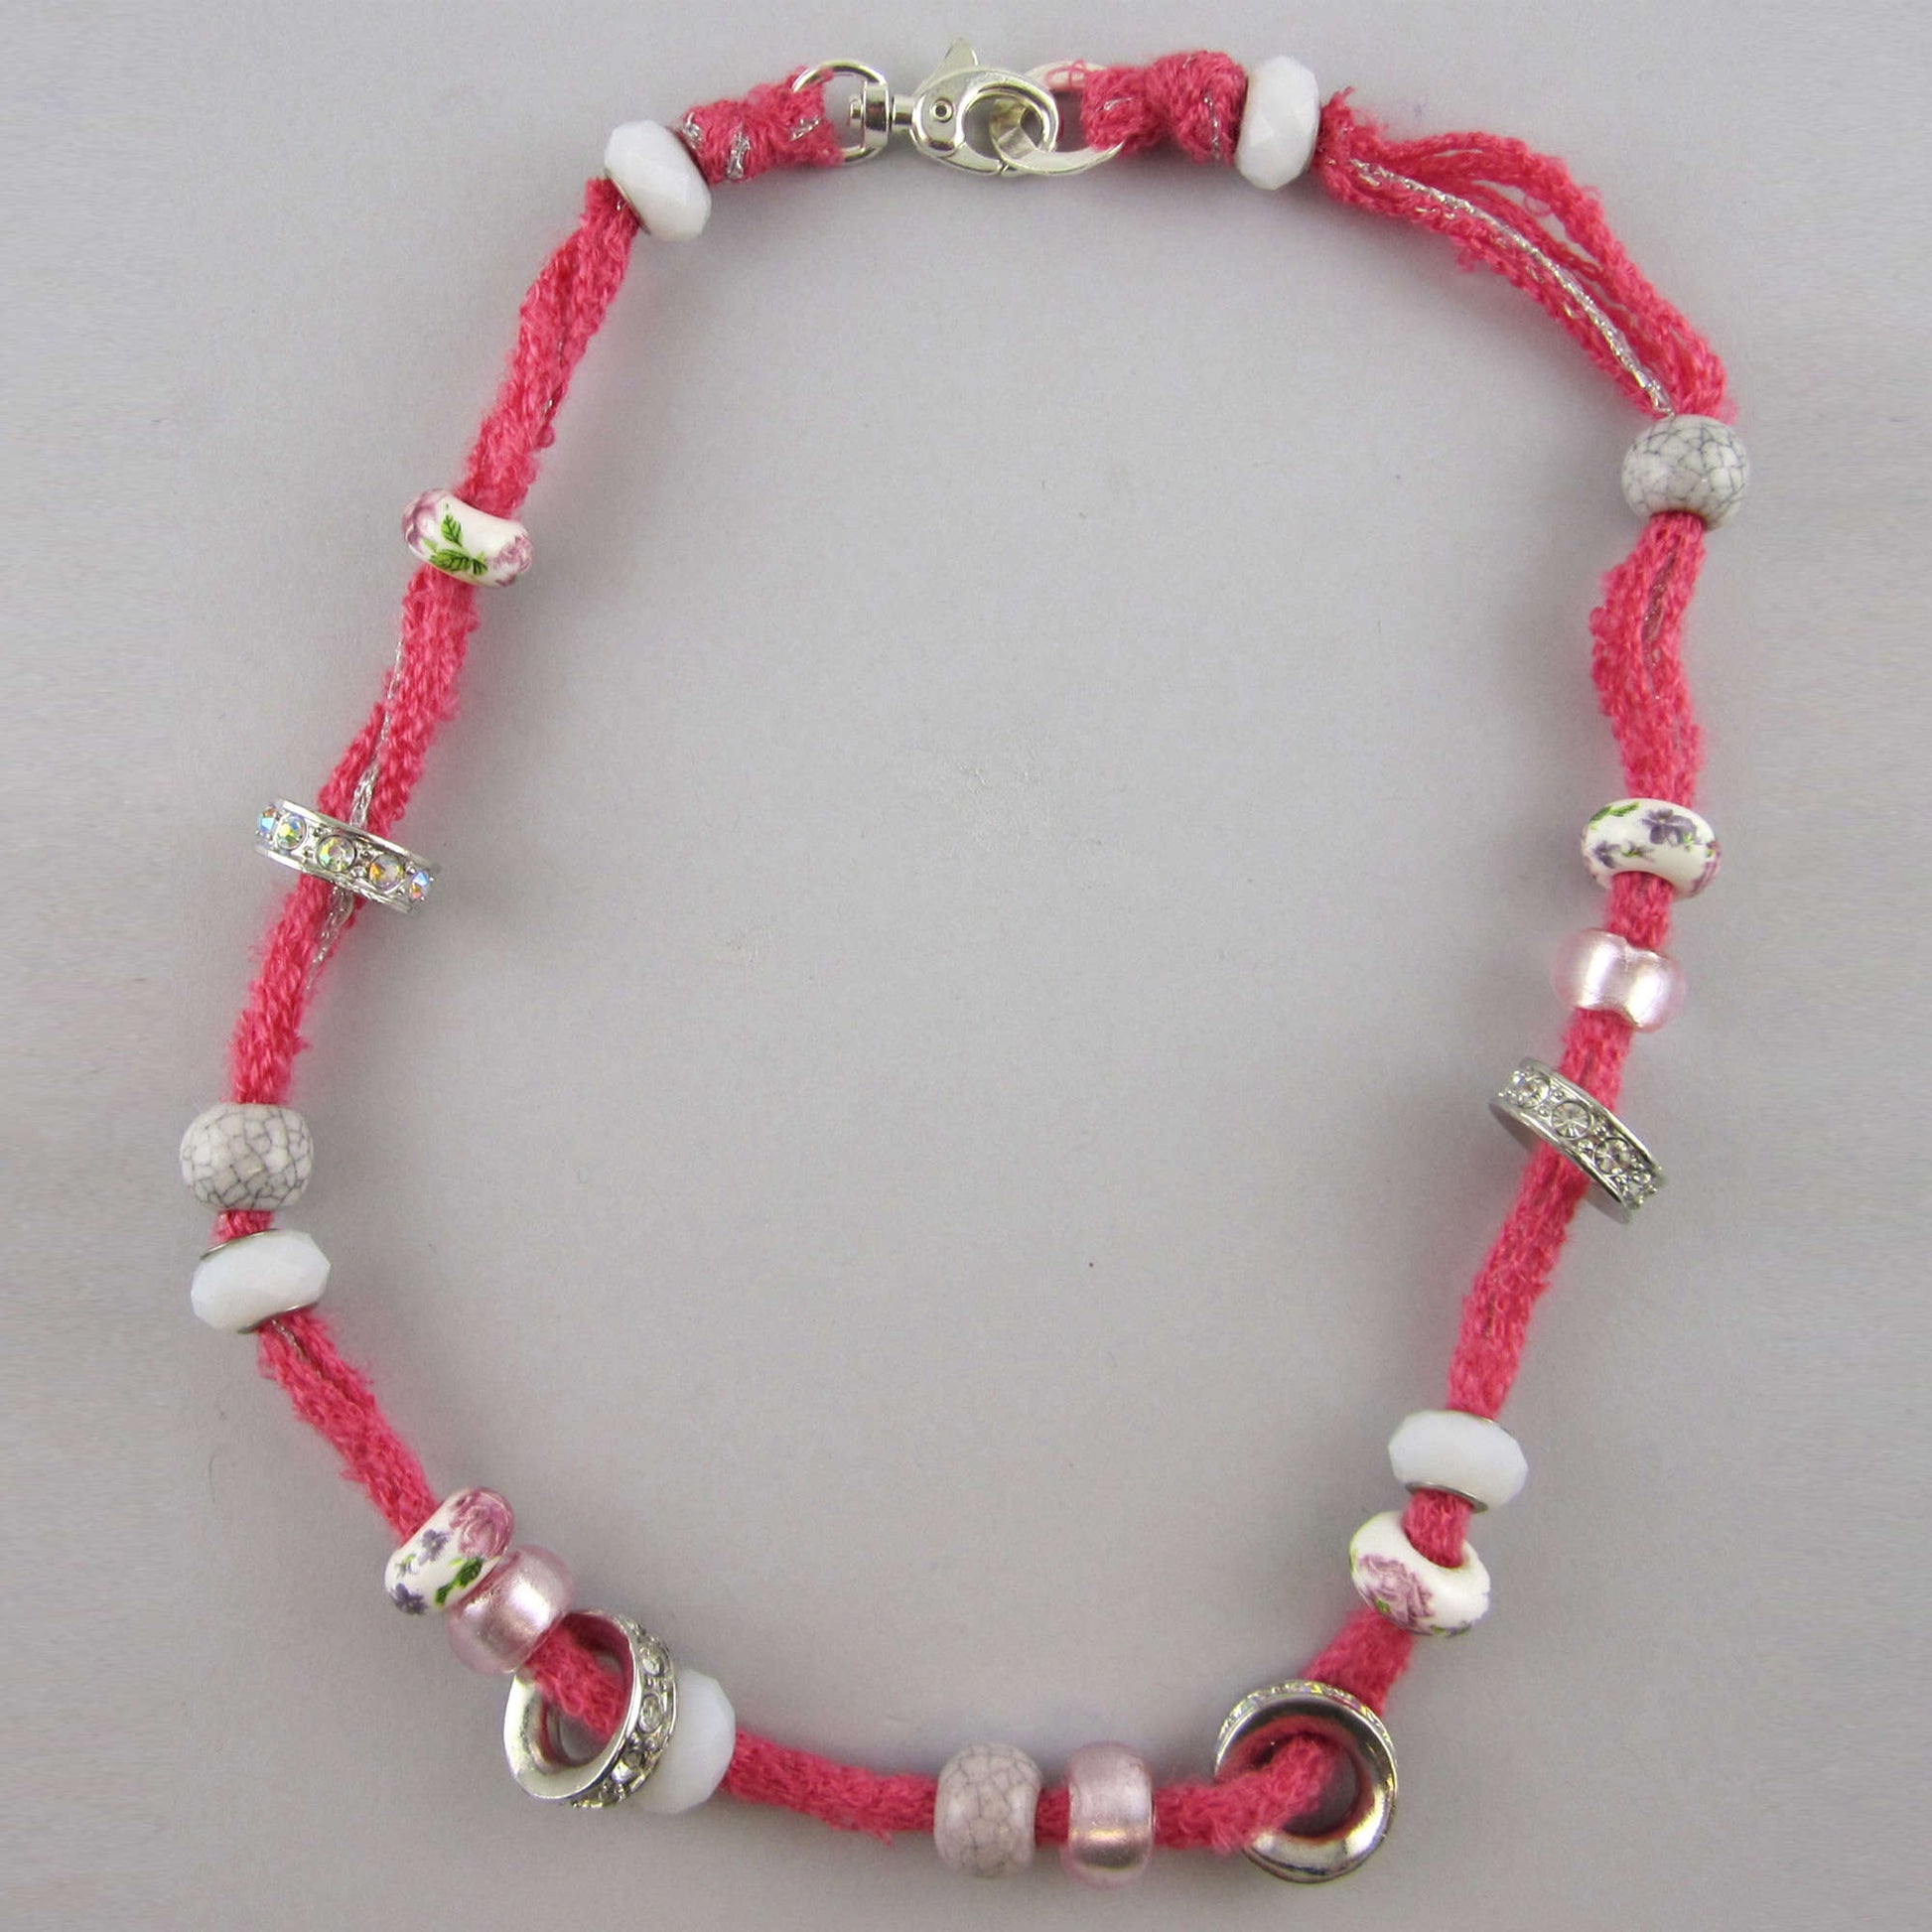 Free Red Heart Craft Wrapped Bracelet Or Necklace Pattern